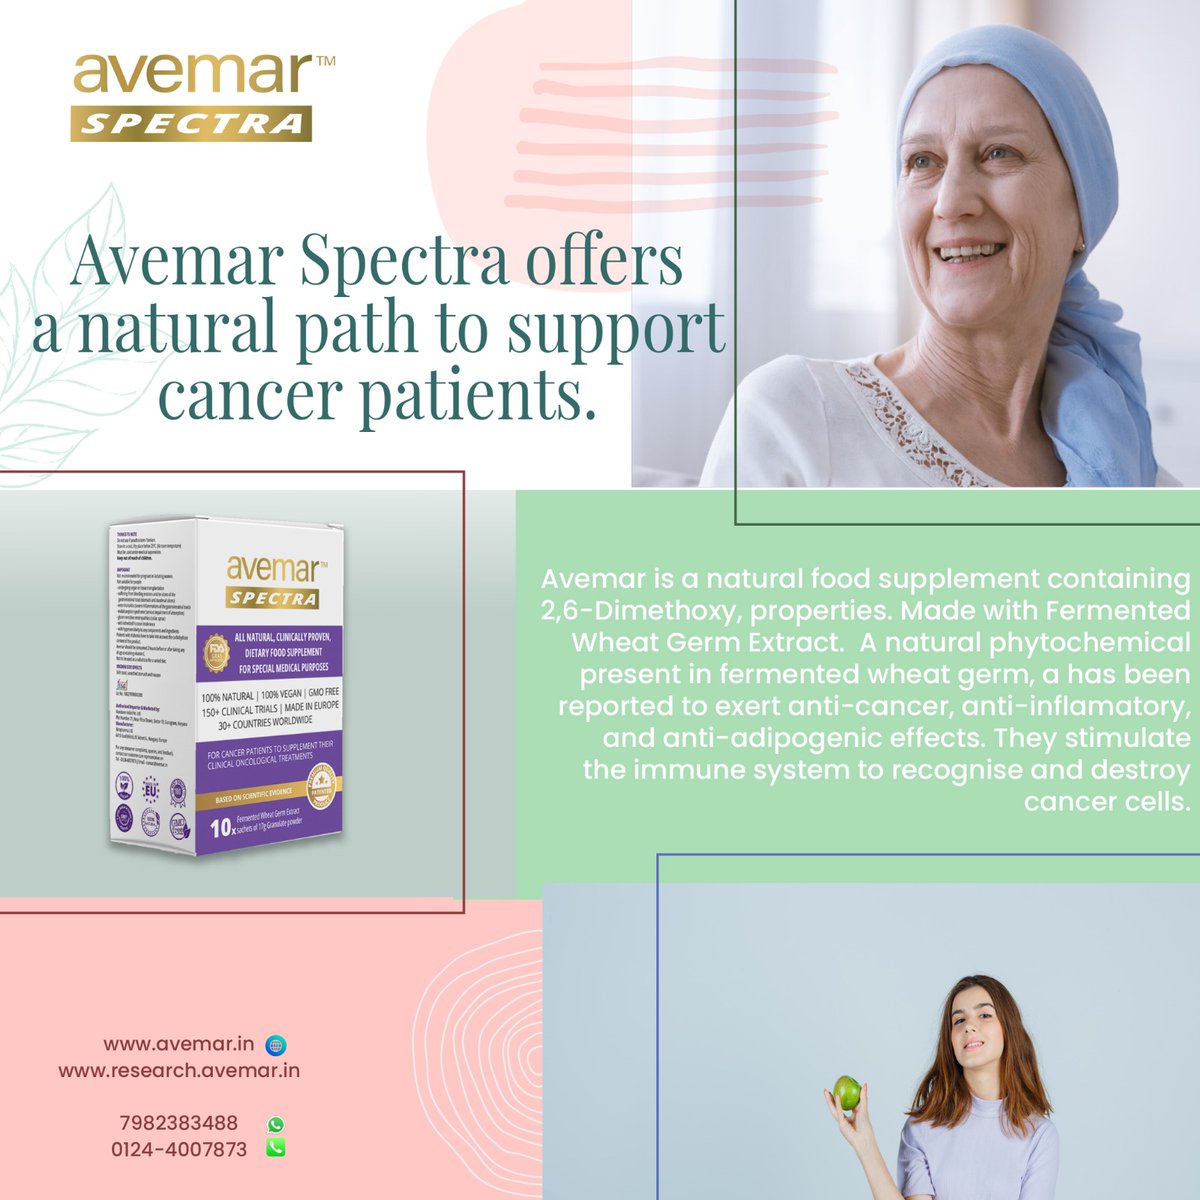 'Embracing each day with Avemar Spectra, a ray of hope in every sip. 🌾💪 #CancerWarrior'
#AvemarSpectraStrength
#fermentedhealing
#WheatGermWarrior
#CancerSupport
#holisticwellness
#radiotherapy
#chemotherapy
#lungcancer
#coloncancer
#oncologist
#Everyone